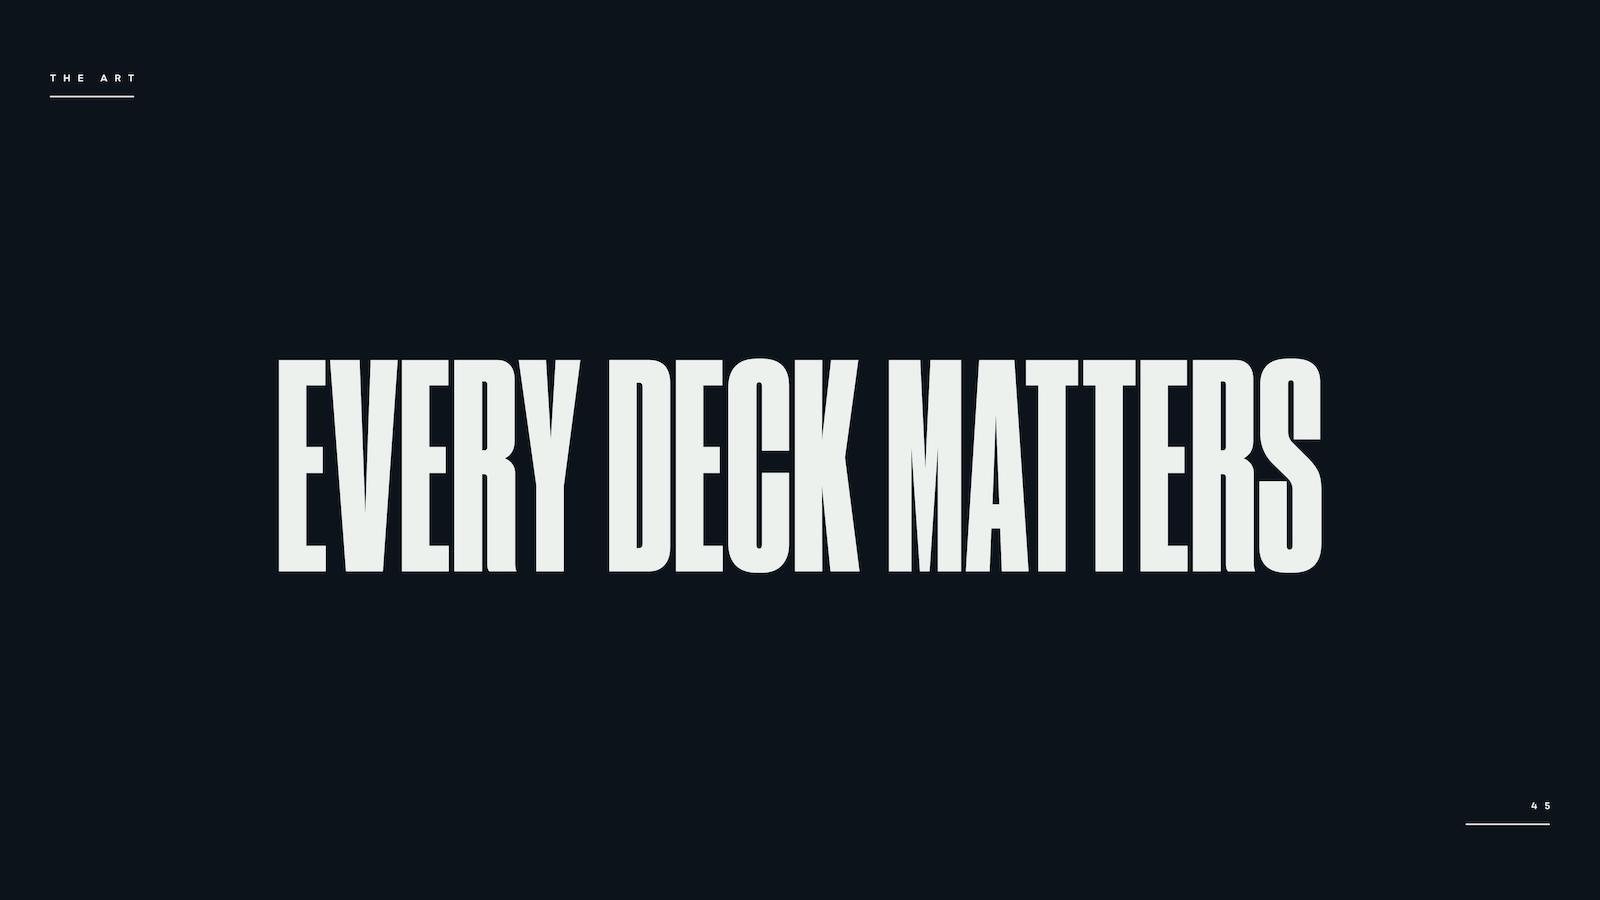 EVERY DECK MATTERS